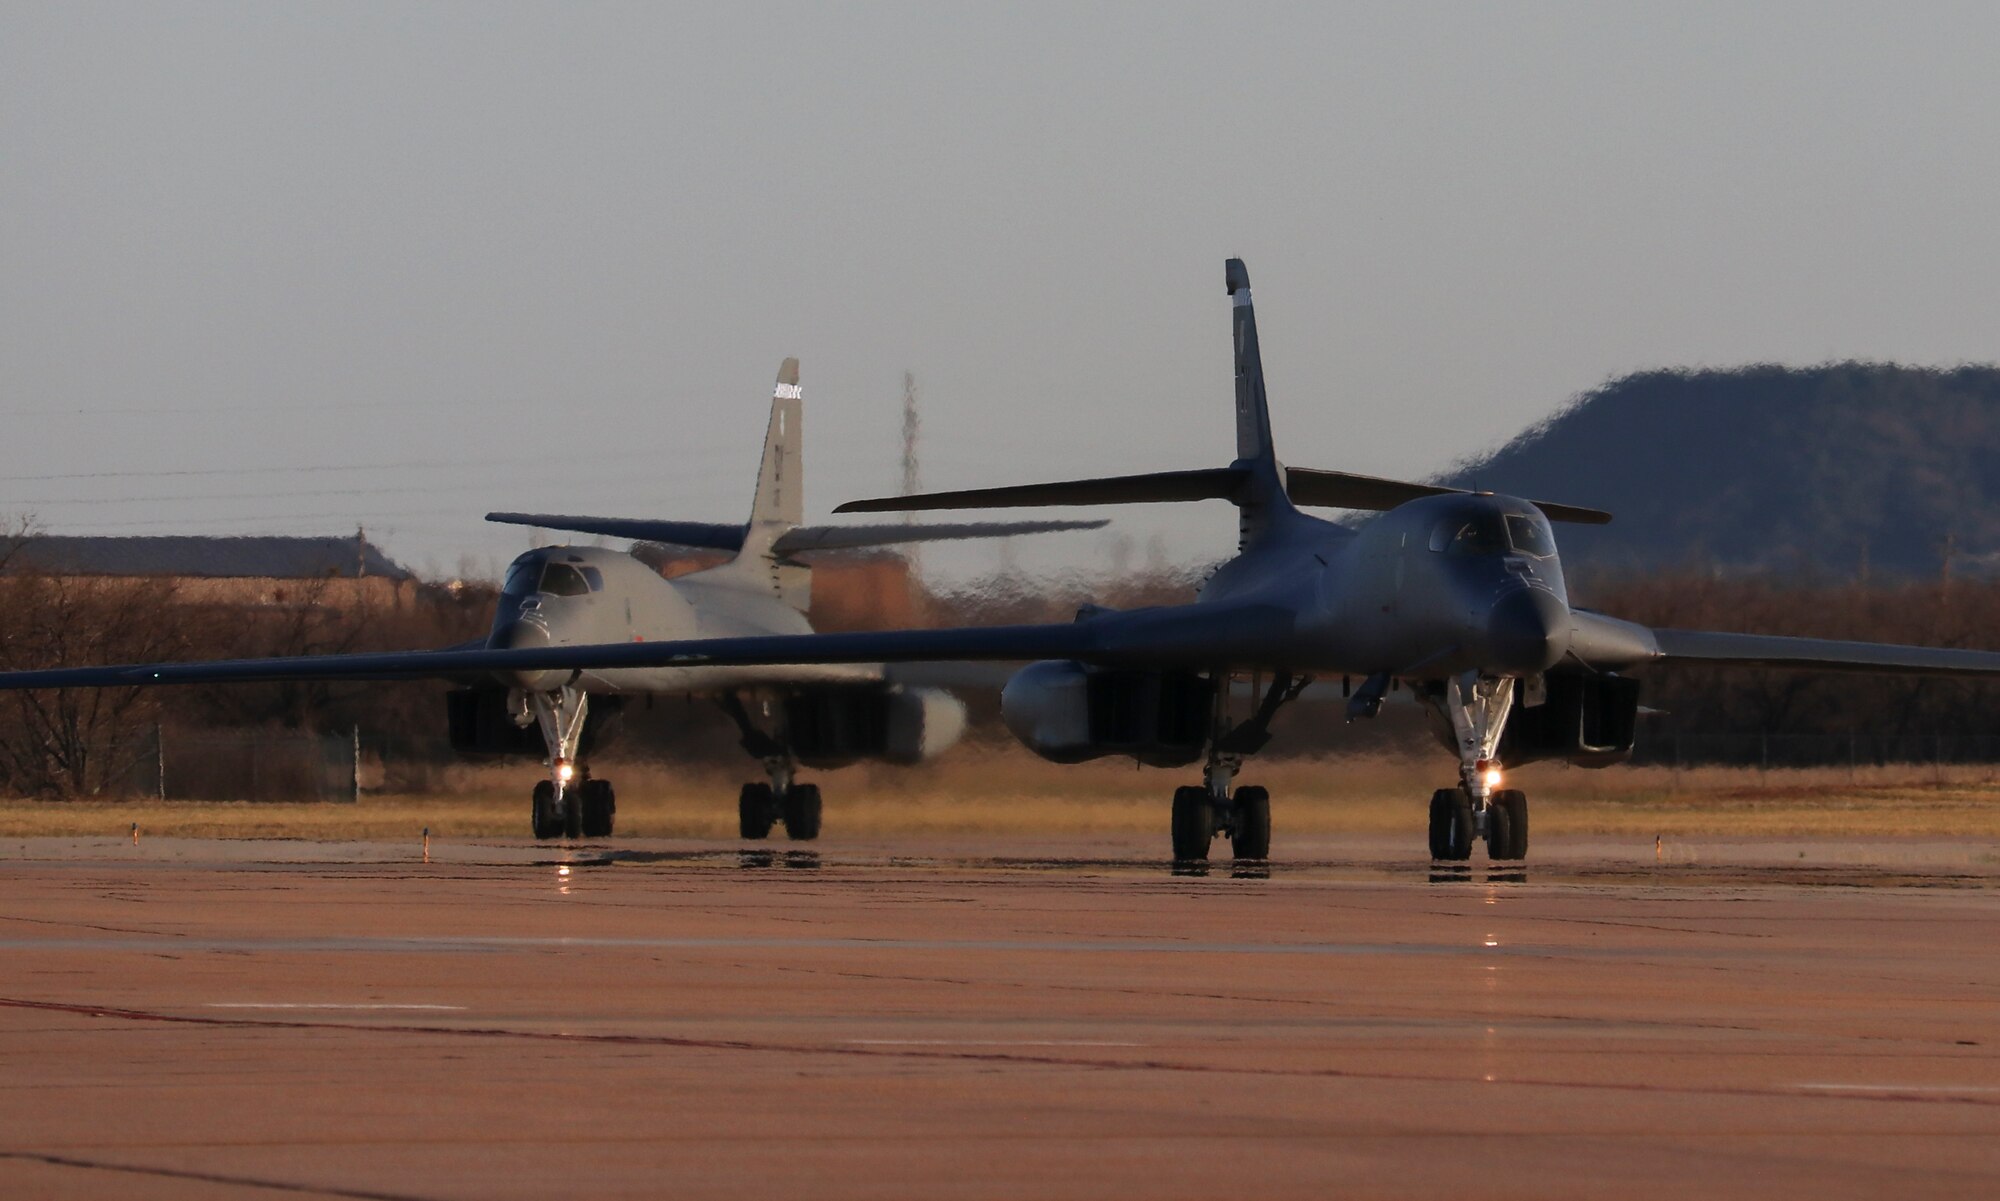 Two B-1B Lancers assigned to the 9th Expeditionary Bomb Squadron taxi on the flightline after returning from a Bomber Task Force Europe deployment in Norway at Dyess Air Force Base, Texas, March 23, 2021. The B-1B aircraft is a highly-versatile, supersonic, multi-mission weapon system that carries the largest payload of both guided and unguided weapons in the U.S. Air Force inventory. (U.S. Air Force photo by Staff Sgt. David Owsianka)